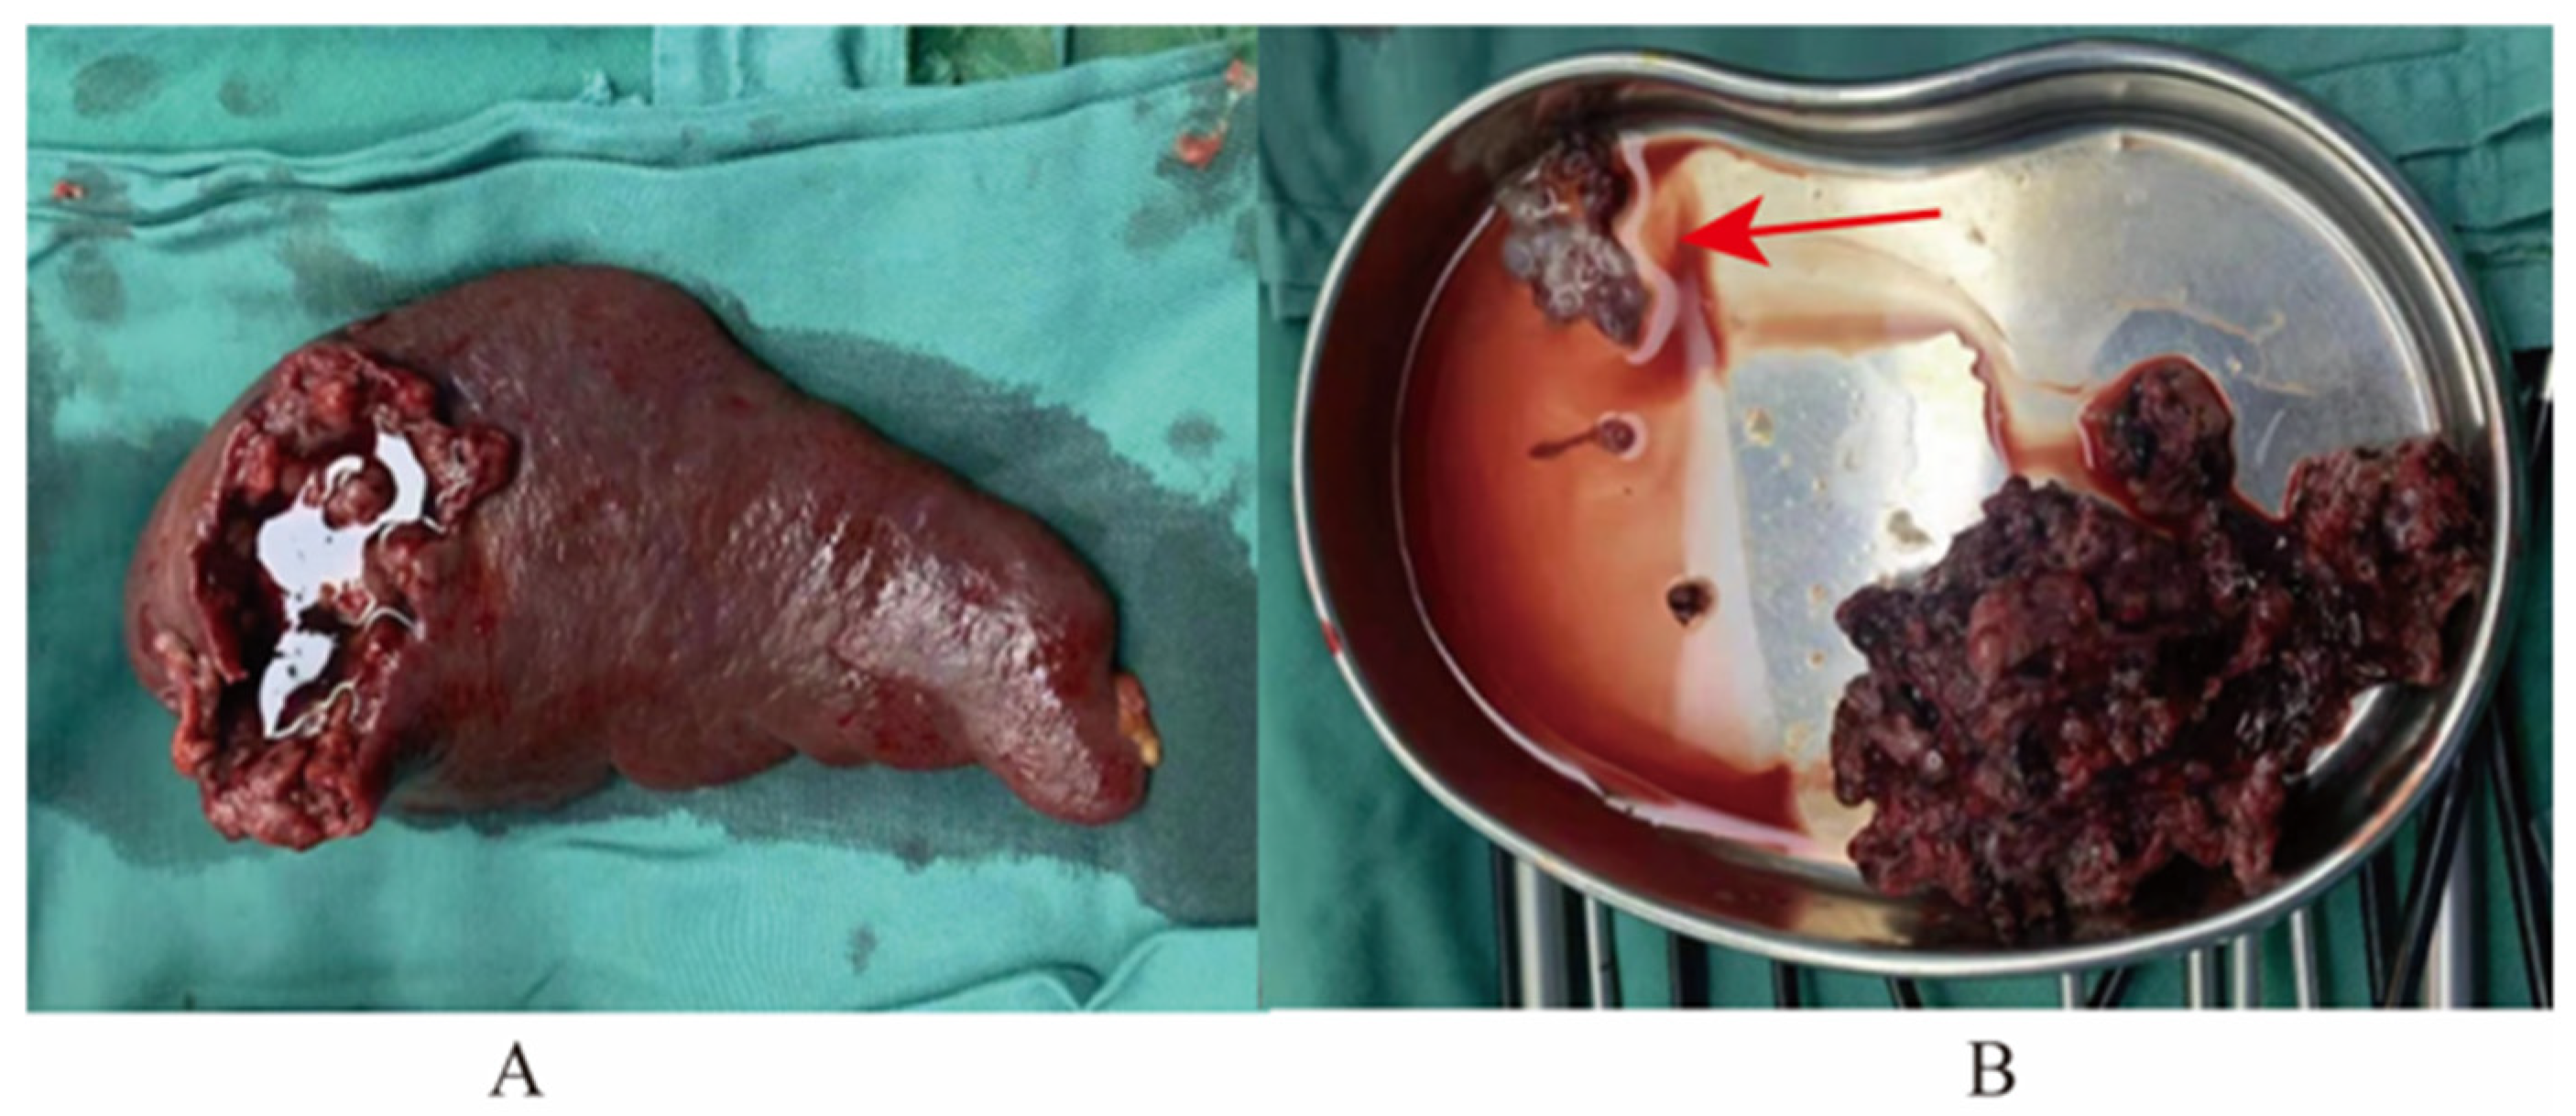 The vaginal metastasis choriocarcinoma, which contained blood clots